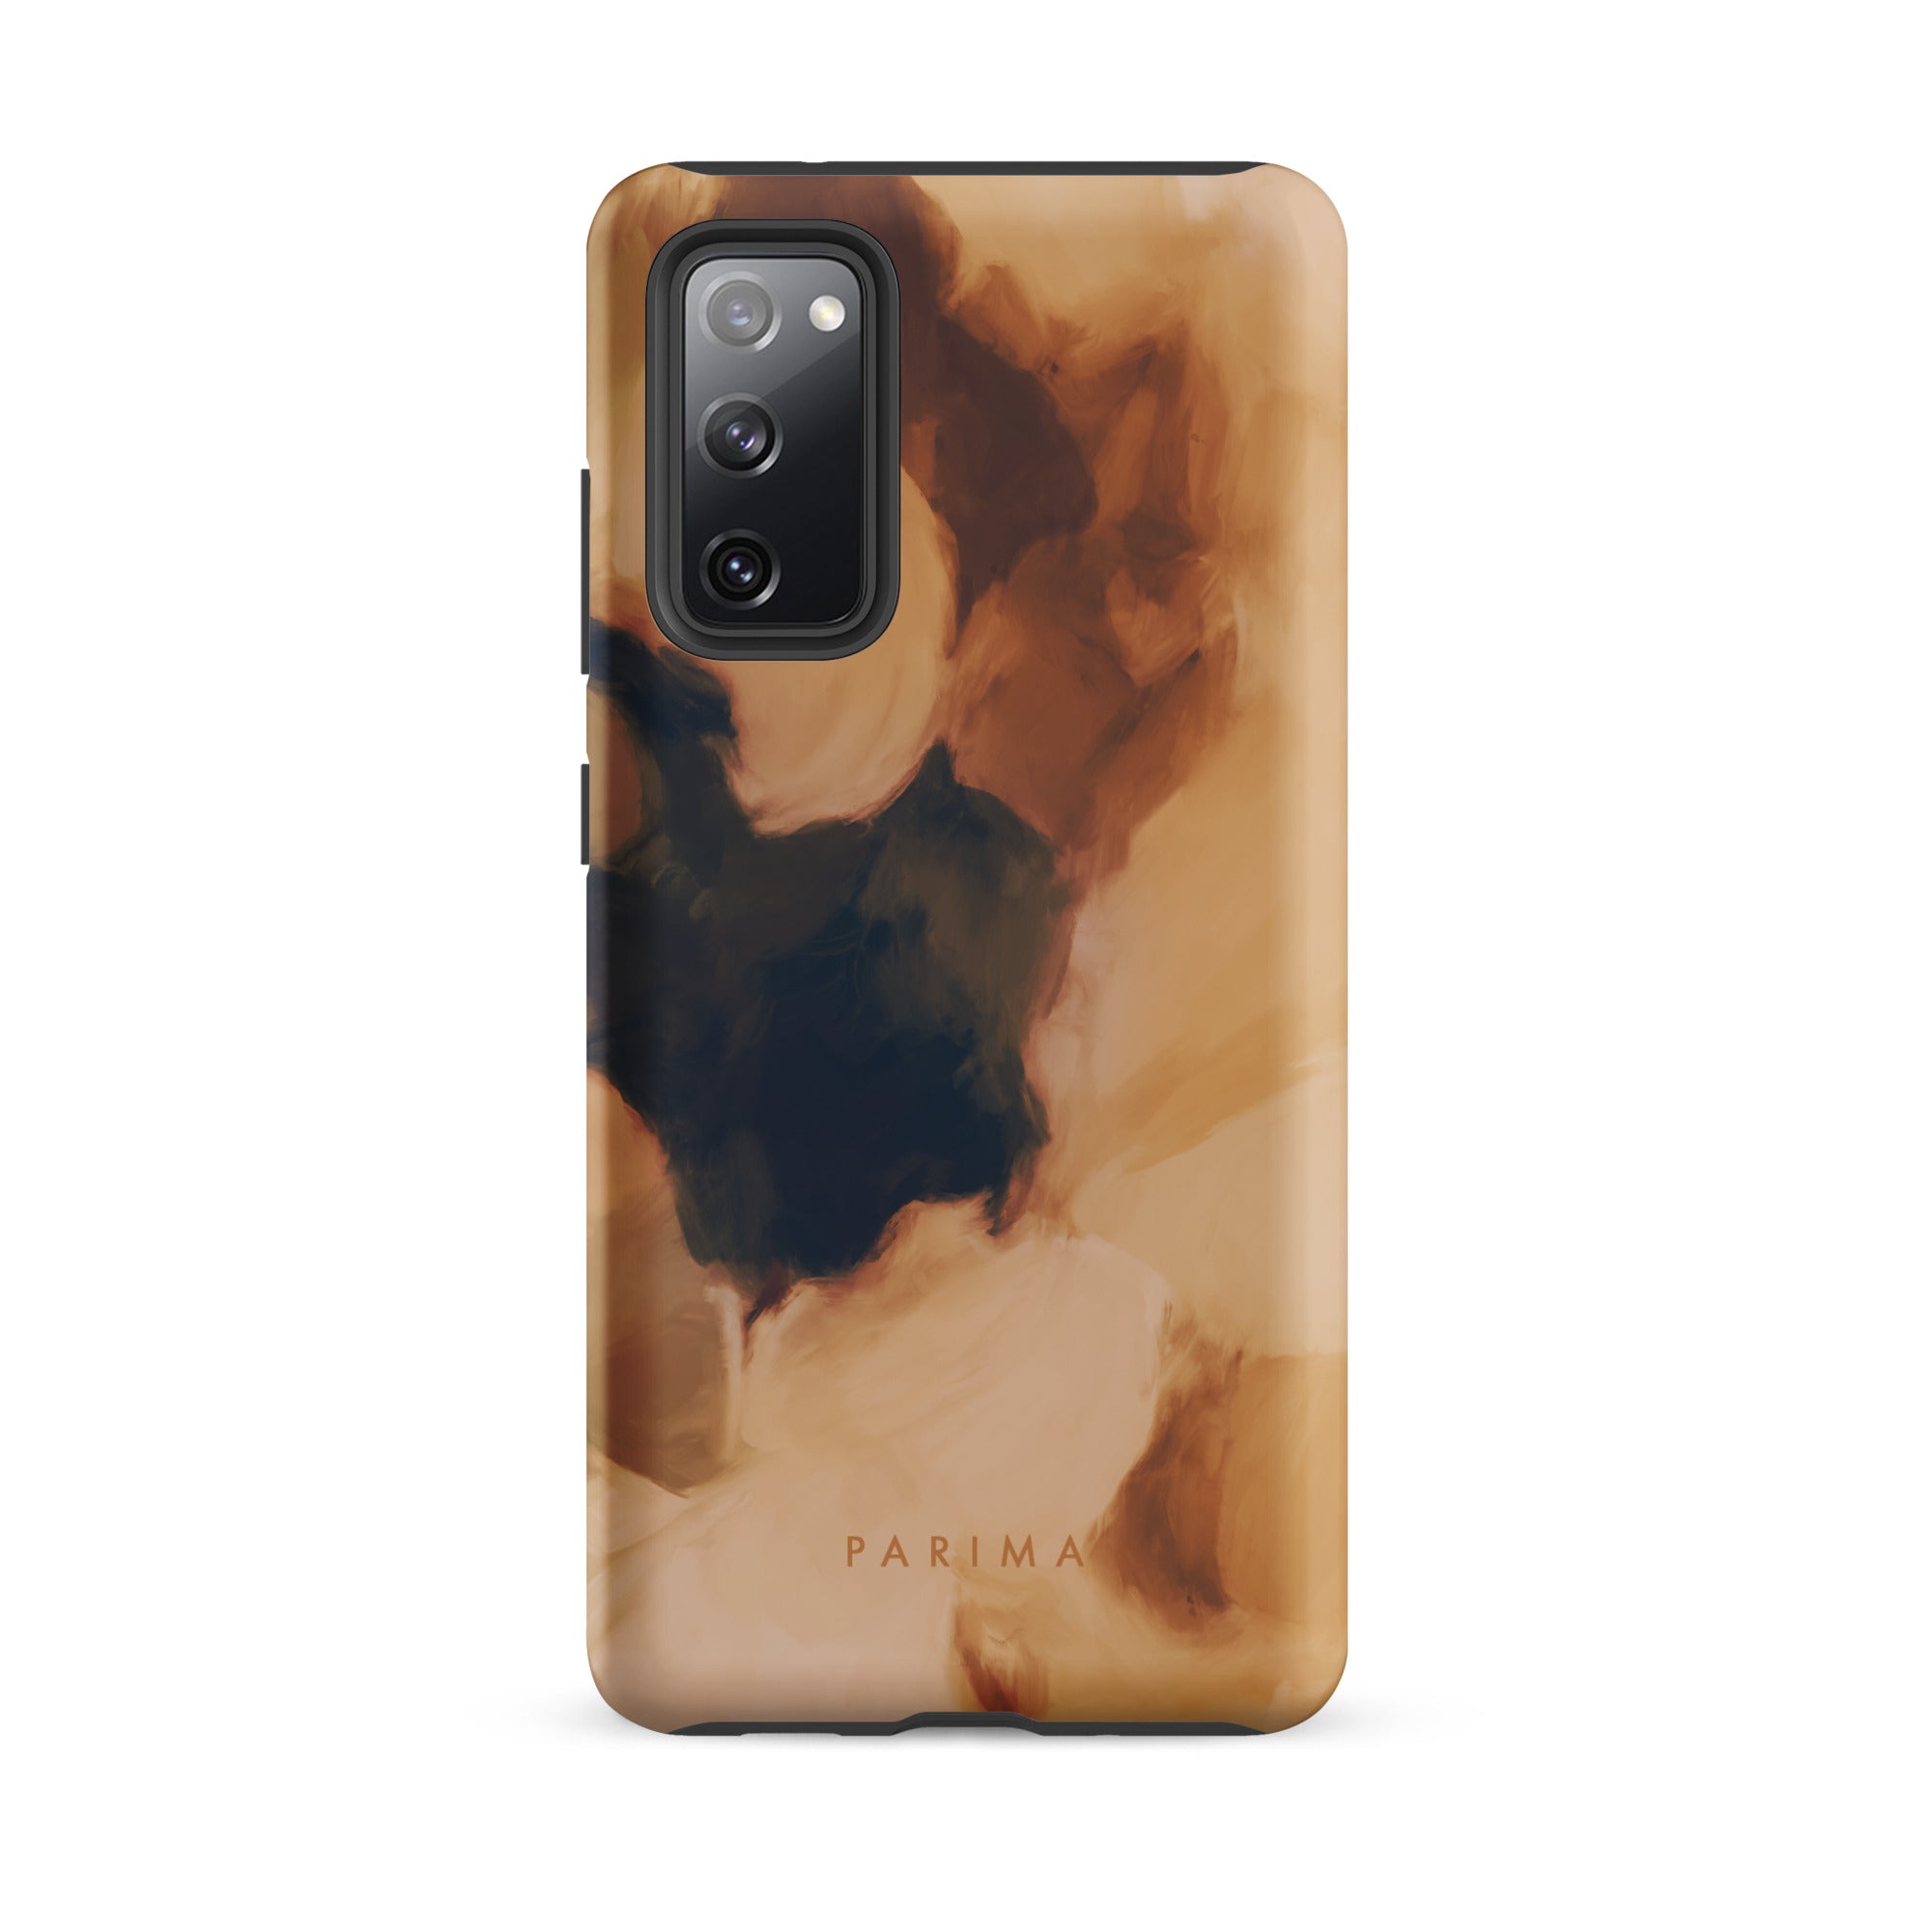 Clay, brown and tan color abstract art on Samsung Galaxy s20 FE tough case by Parima Studio